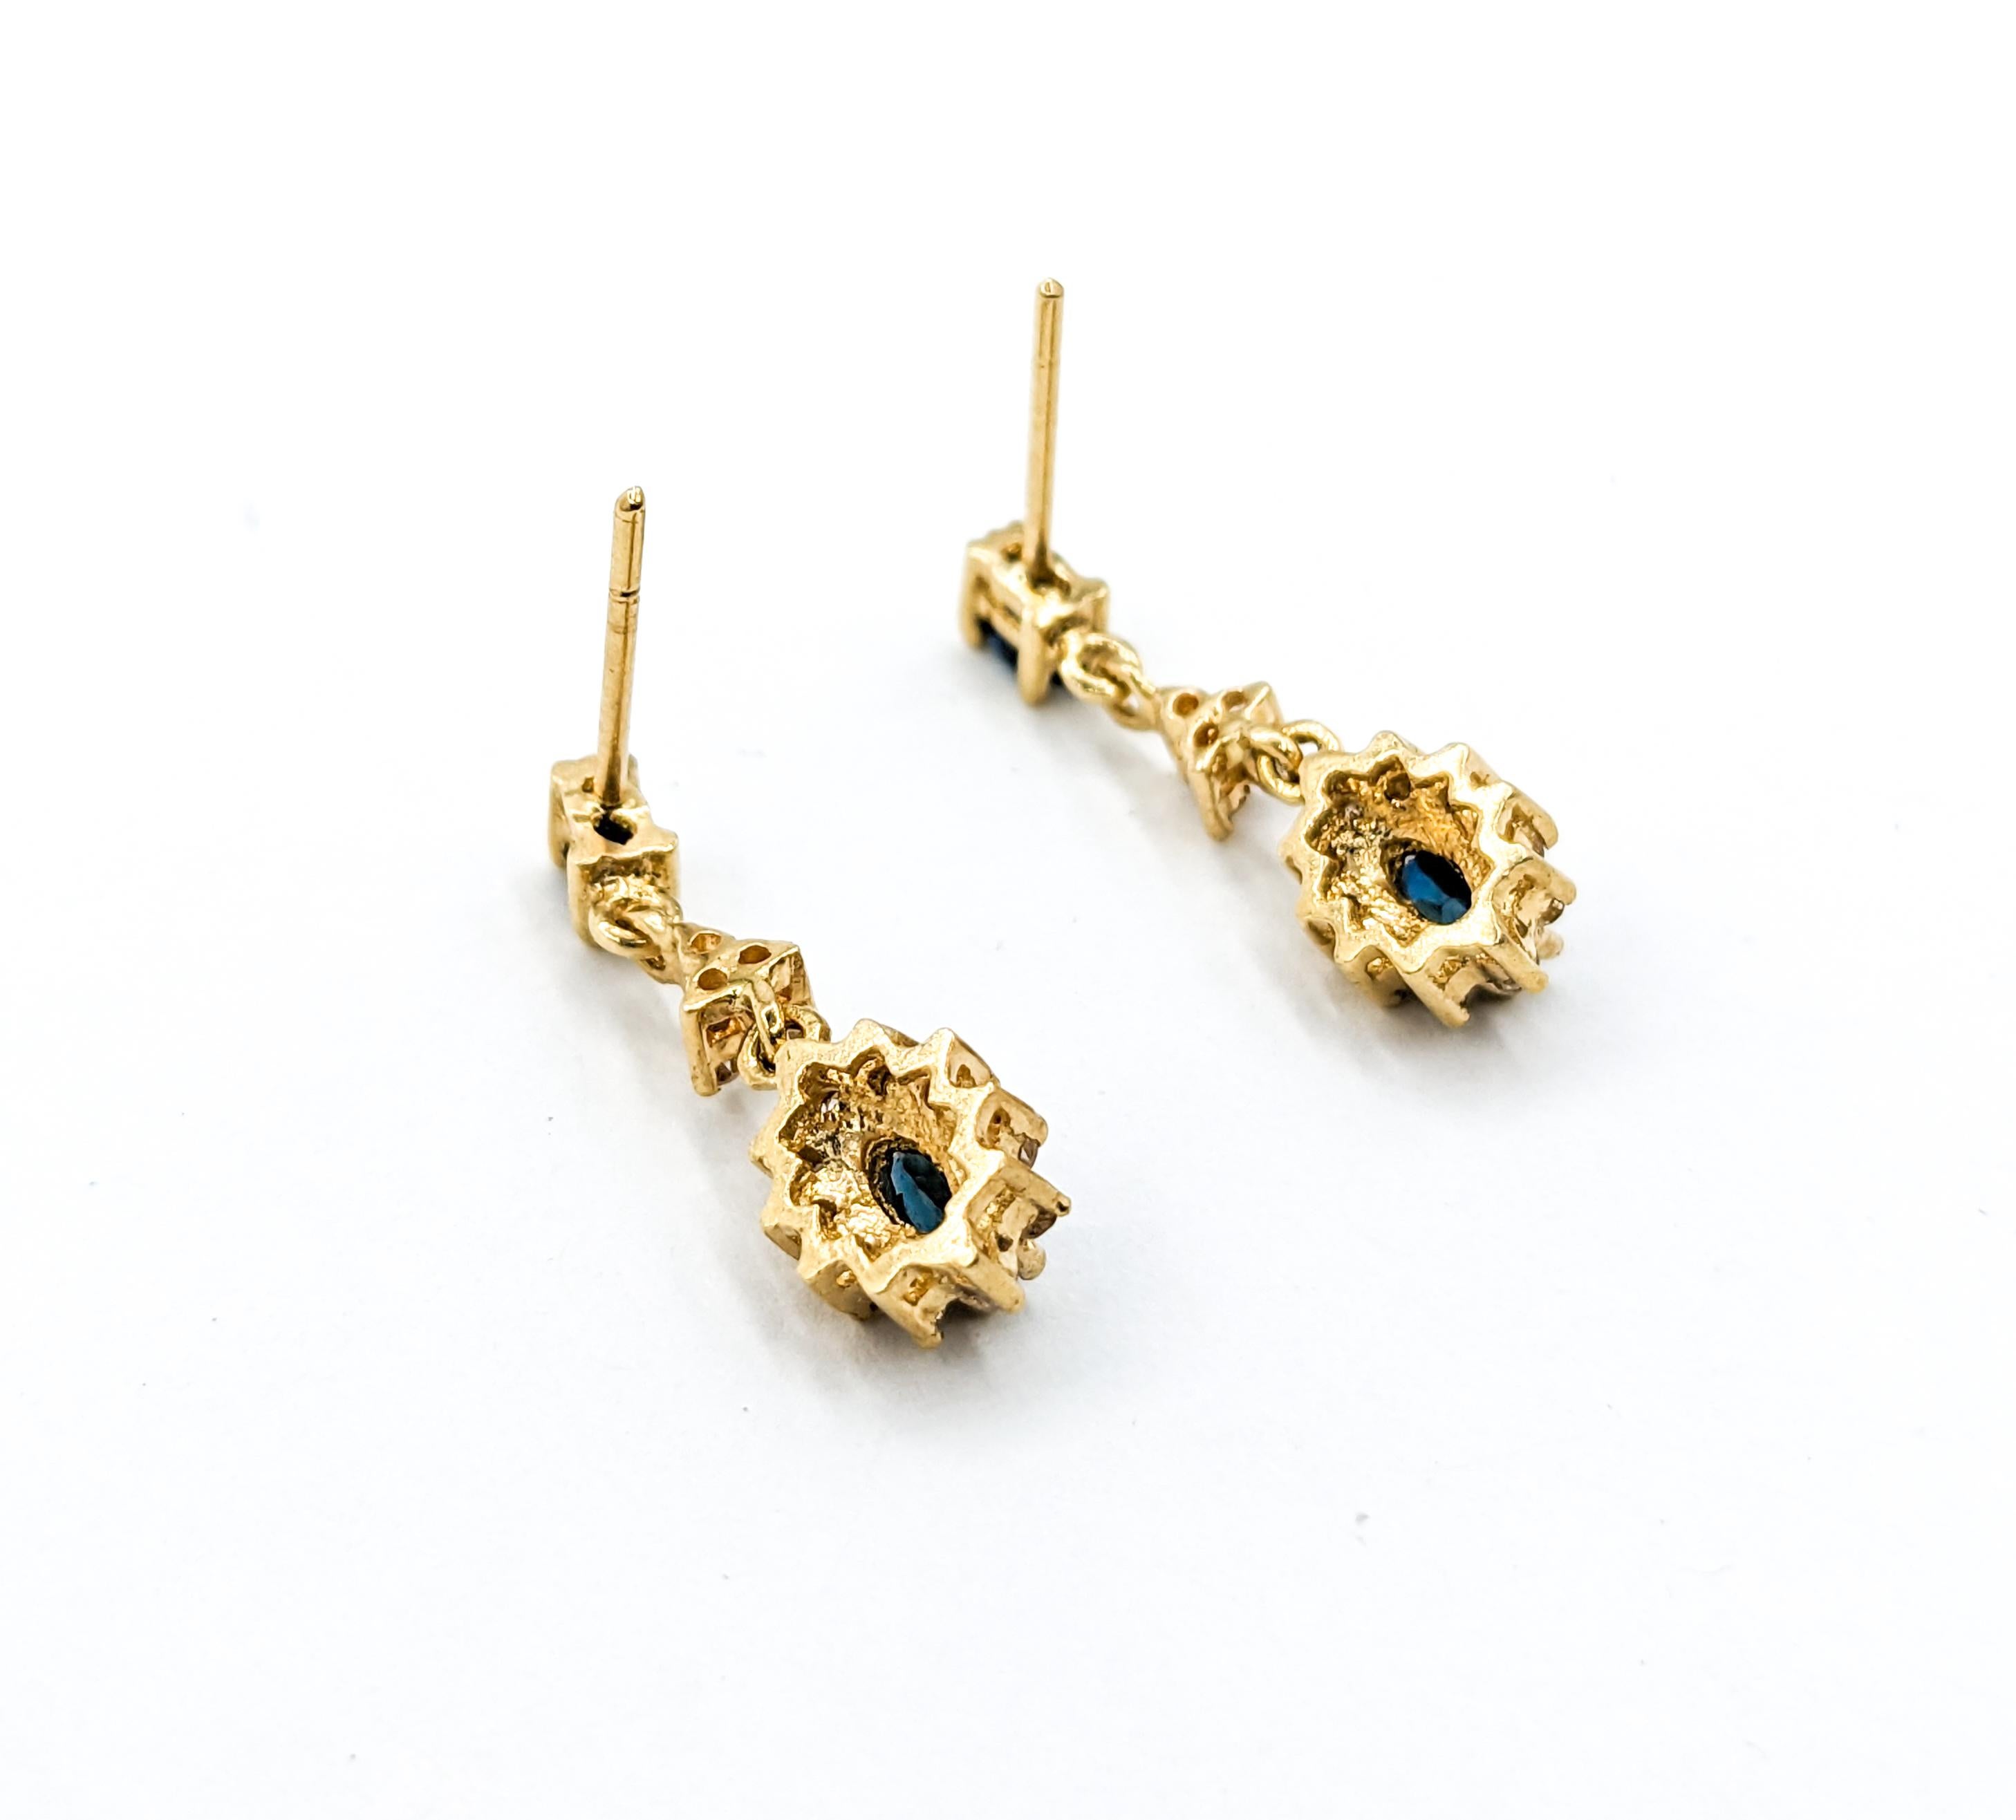 Sapphire & Diamond Halo Dangle Stud Earrings in Yellow Gold

These elegant Sapphire Earrings are crafted in 14k Yellow Gold and feature a total of 0.20 carats of Single Cut Diamond accents. The diamonds boast I clarity and near colorless, white